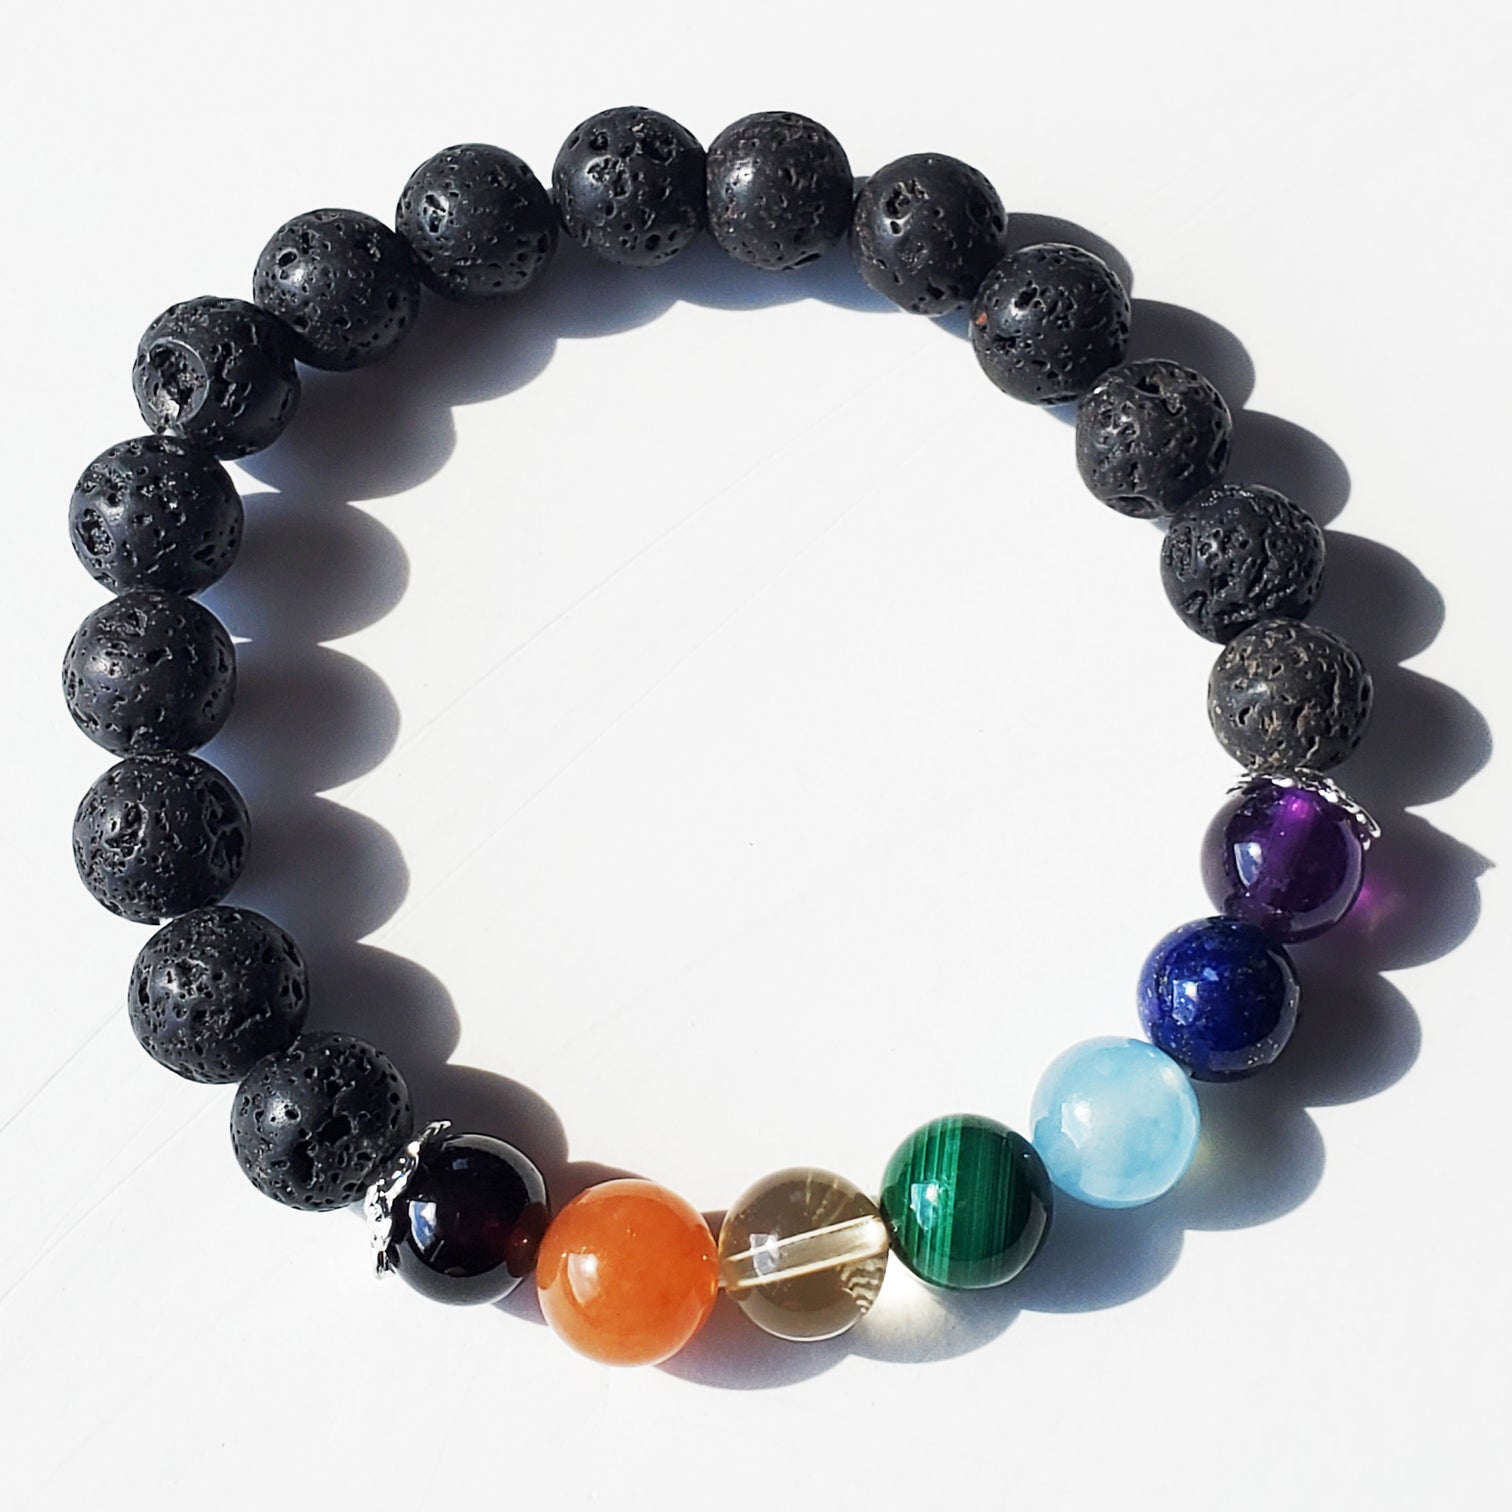 Chakra Bracelet Meaning, Types & How it Works? Siddhi Yoga